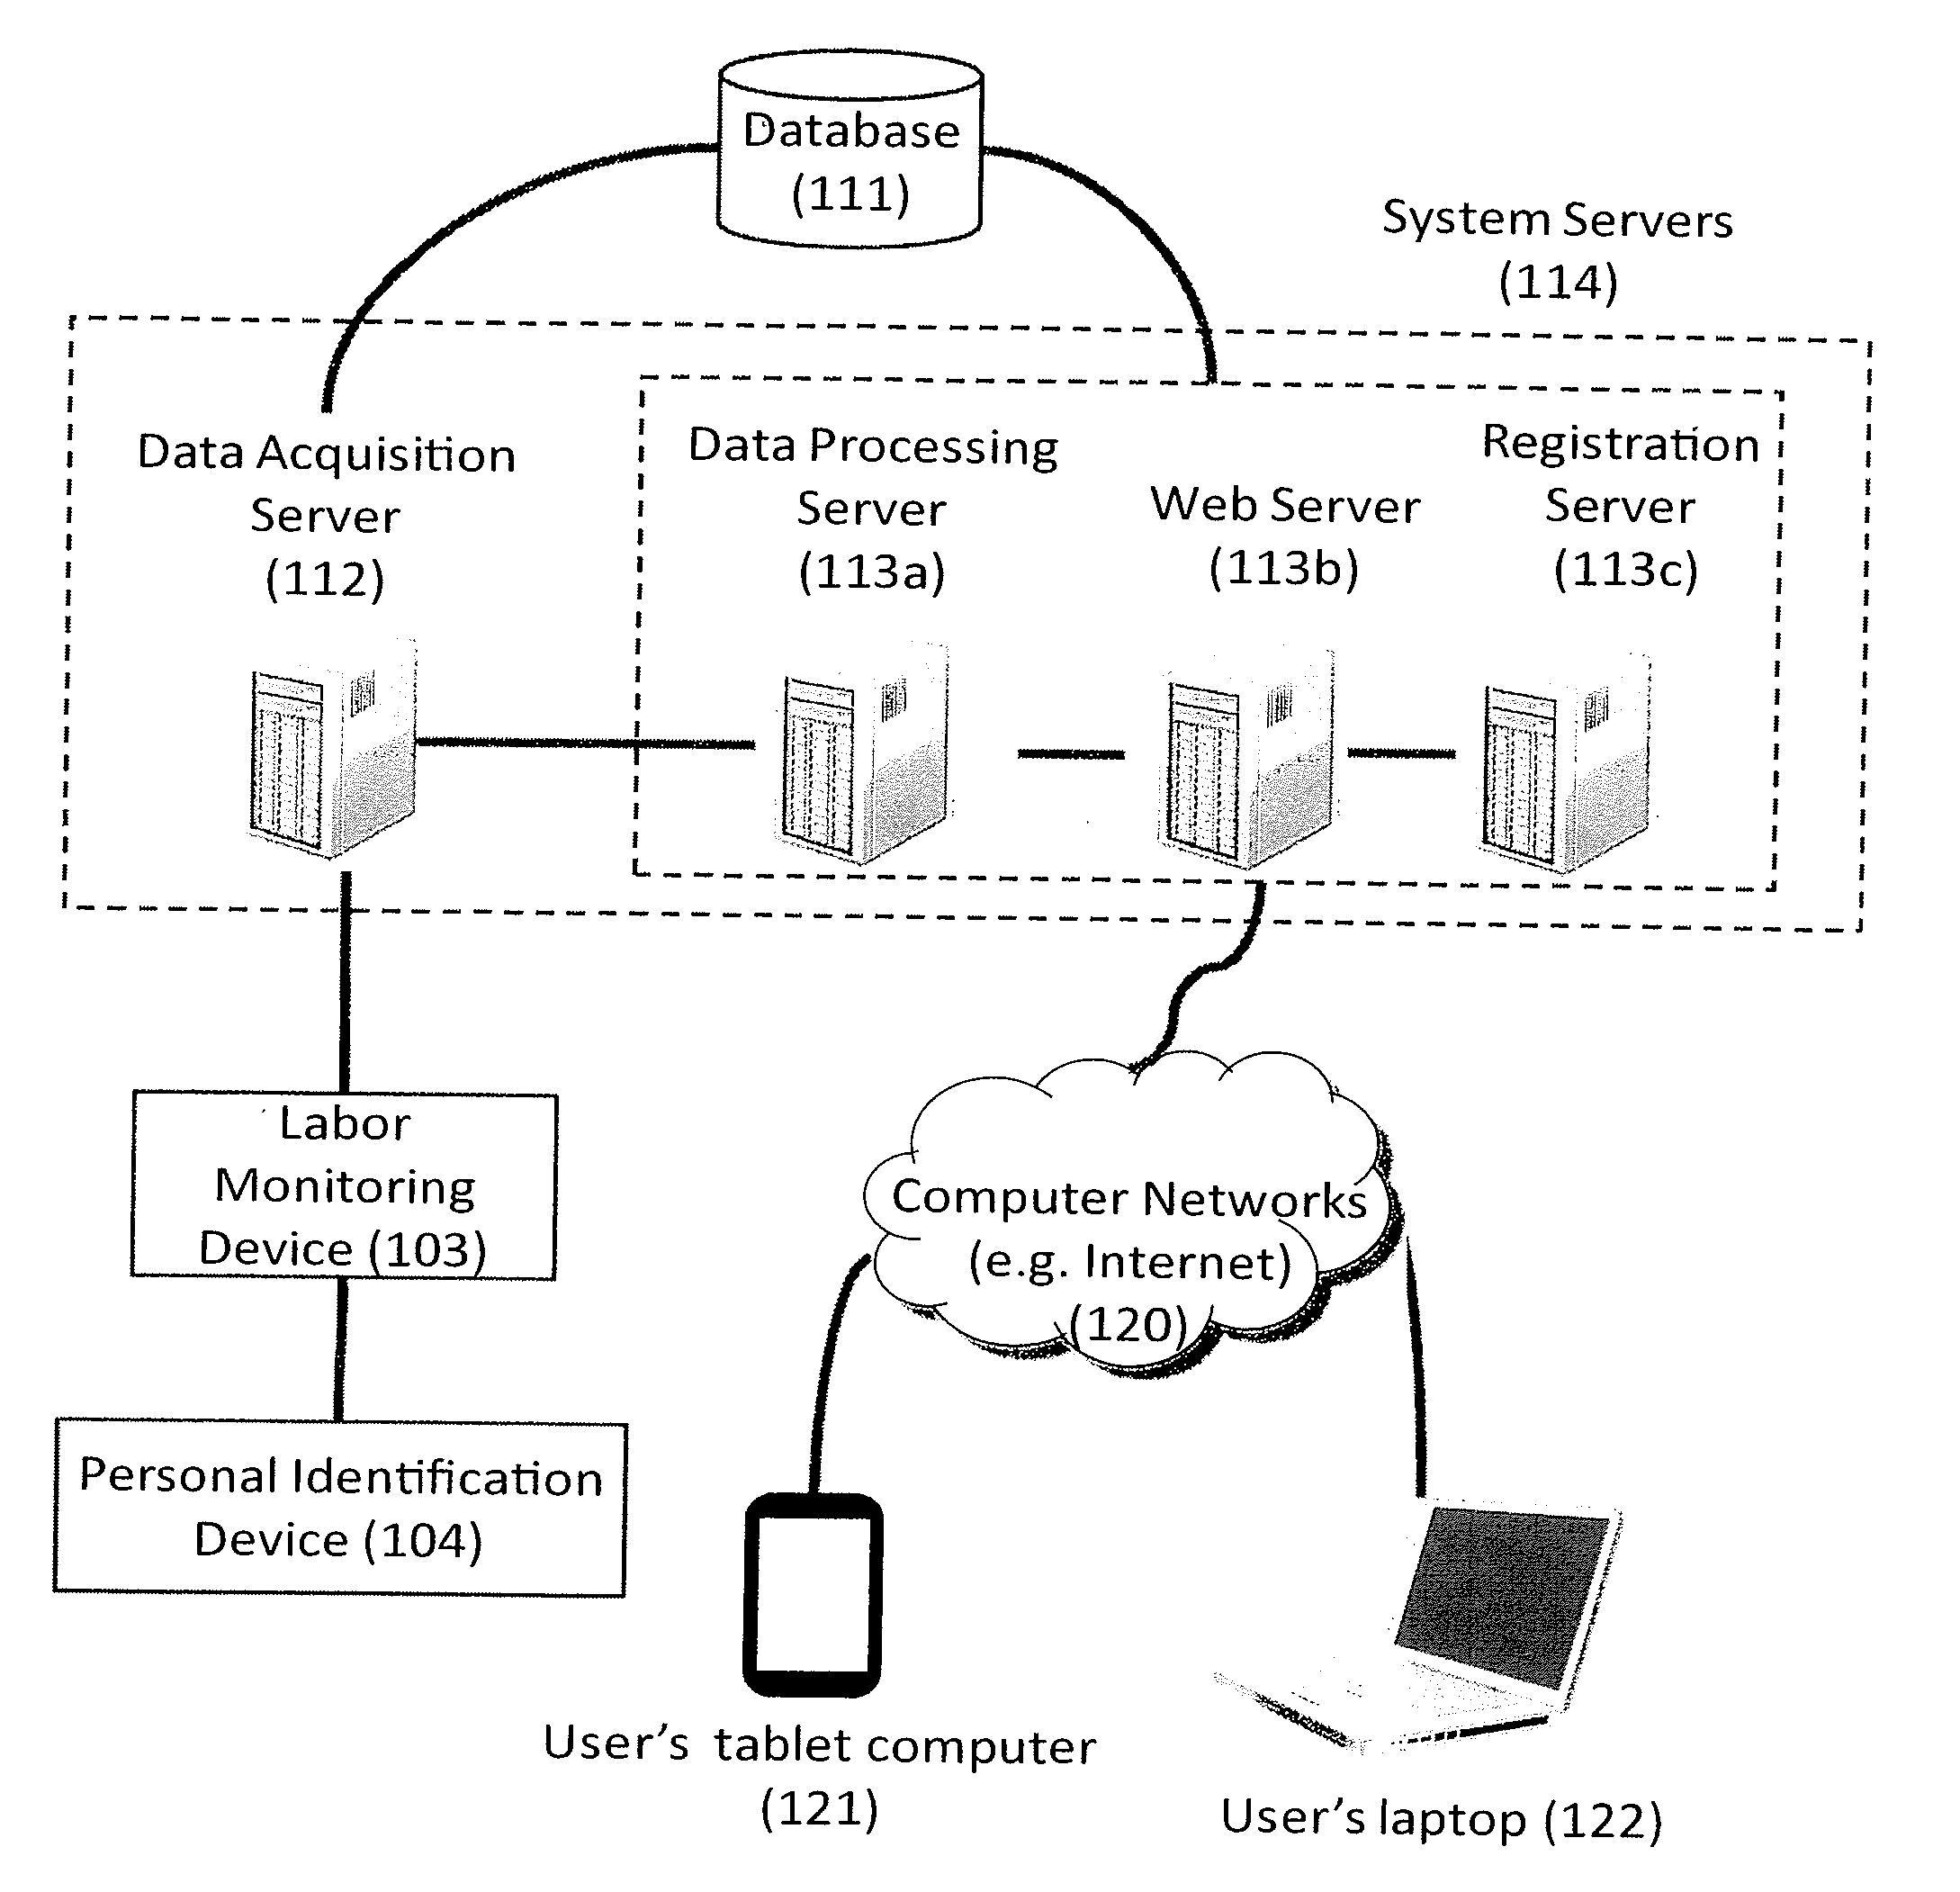 Systems and Methods for Collecting and Accruing Labor Activity Data Under Many-to-Many Employment Relation and with Distributed Access